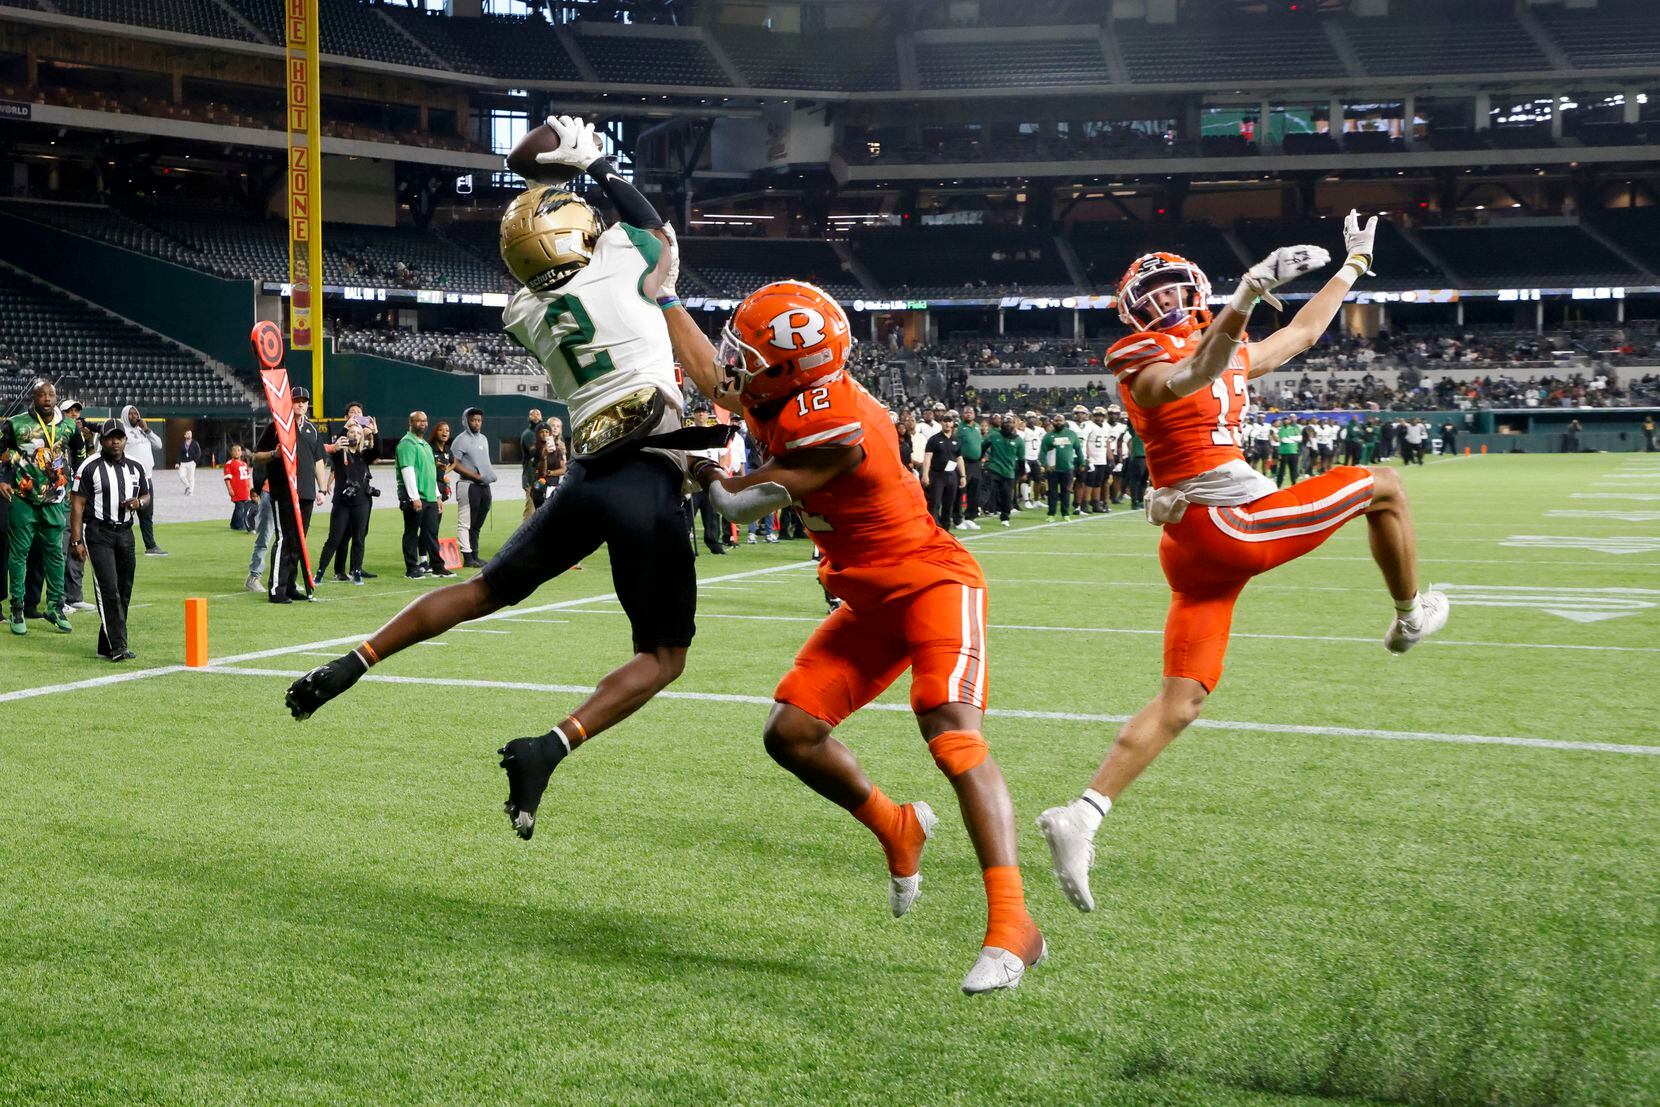 DeSoto receiver Mike Murphy makes a touchdown reception in front of Rockwall defenders Kevin Cunningham (12) and Cadien Robinson (13) during the second half of the Class 6A Division I area round high school football game in Arlington, Texas on Saturday, Sept. 20, 2021. (Michael Ainsworth/Special Contributor)